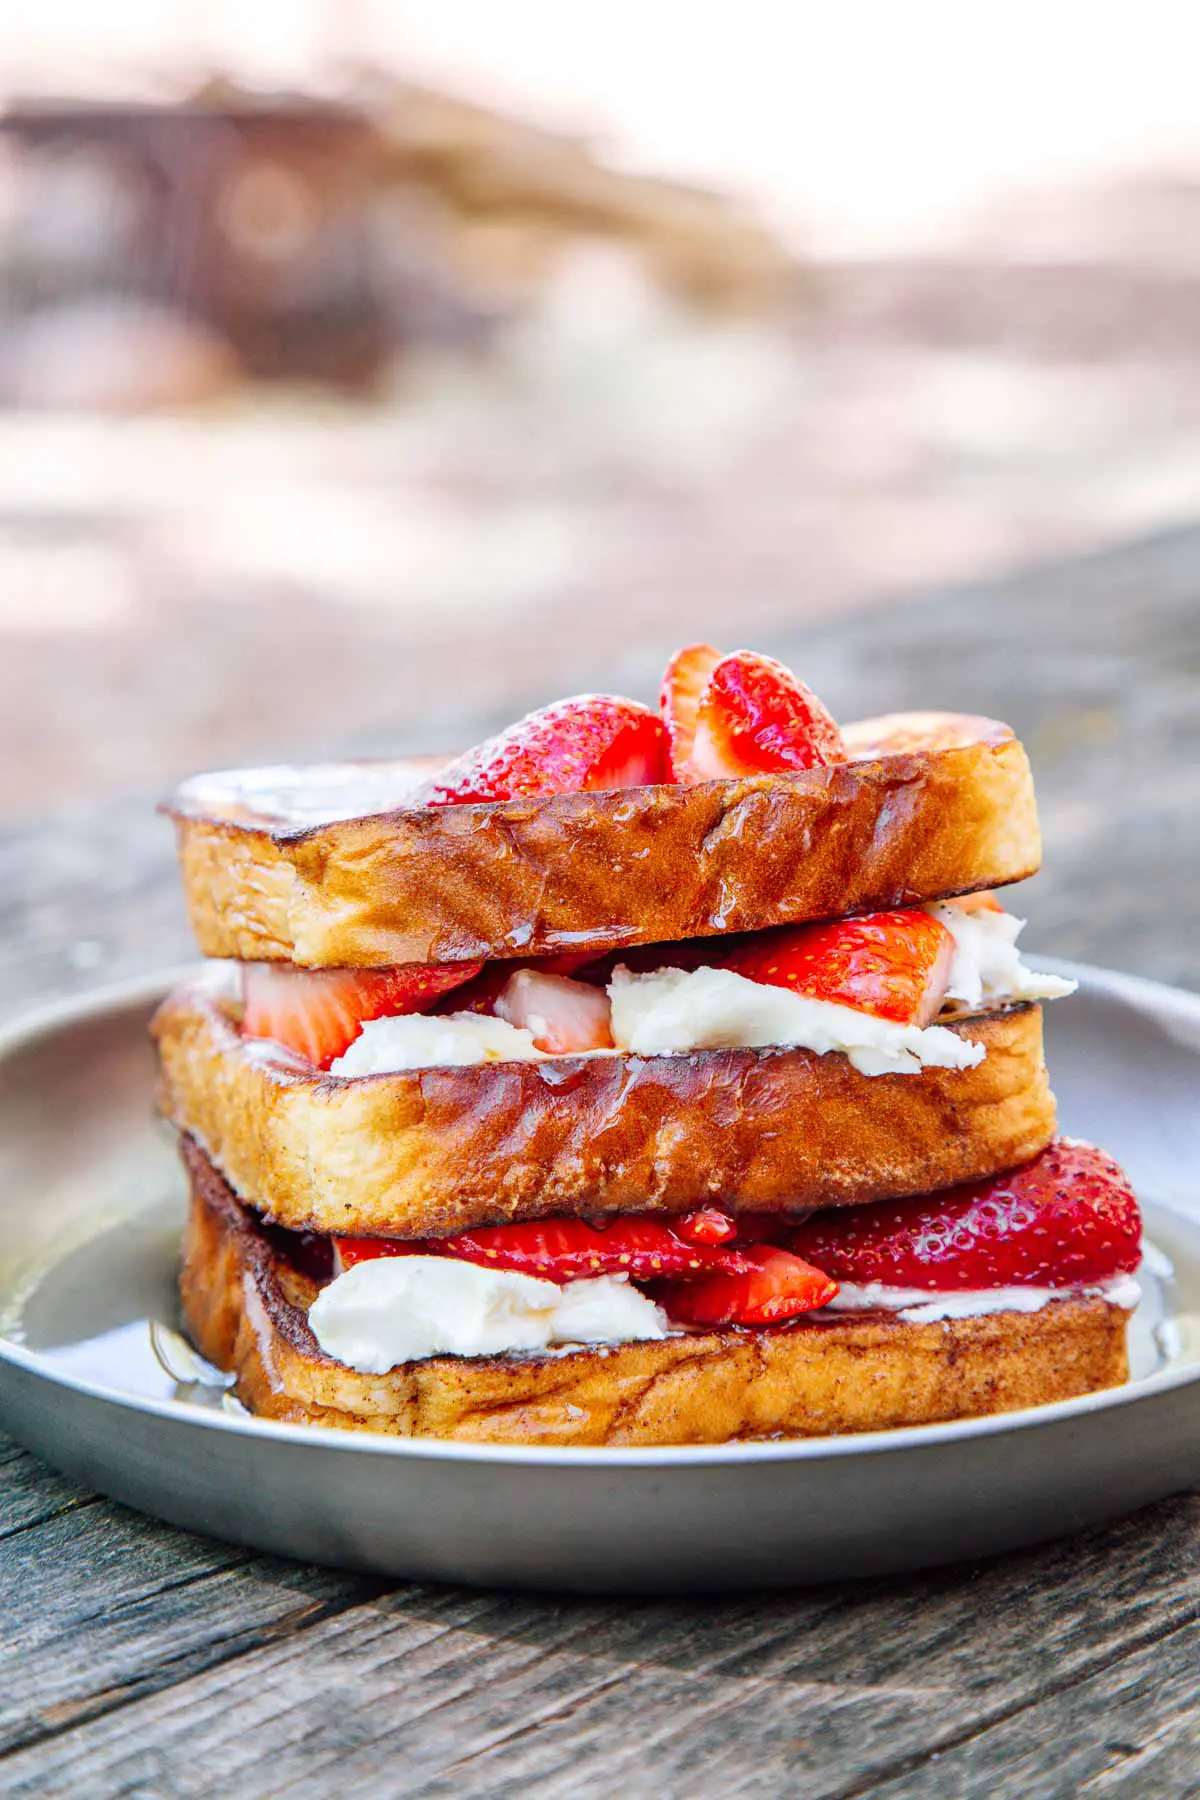 Stuffed french toast topped with strawberries on a camping plate